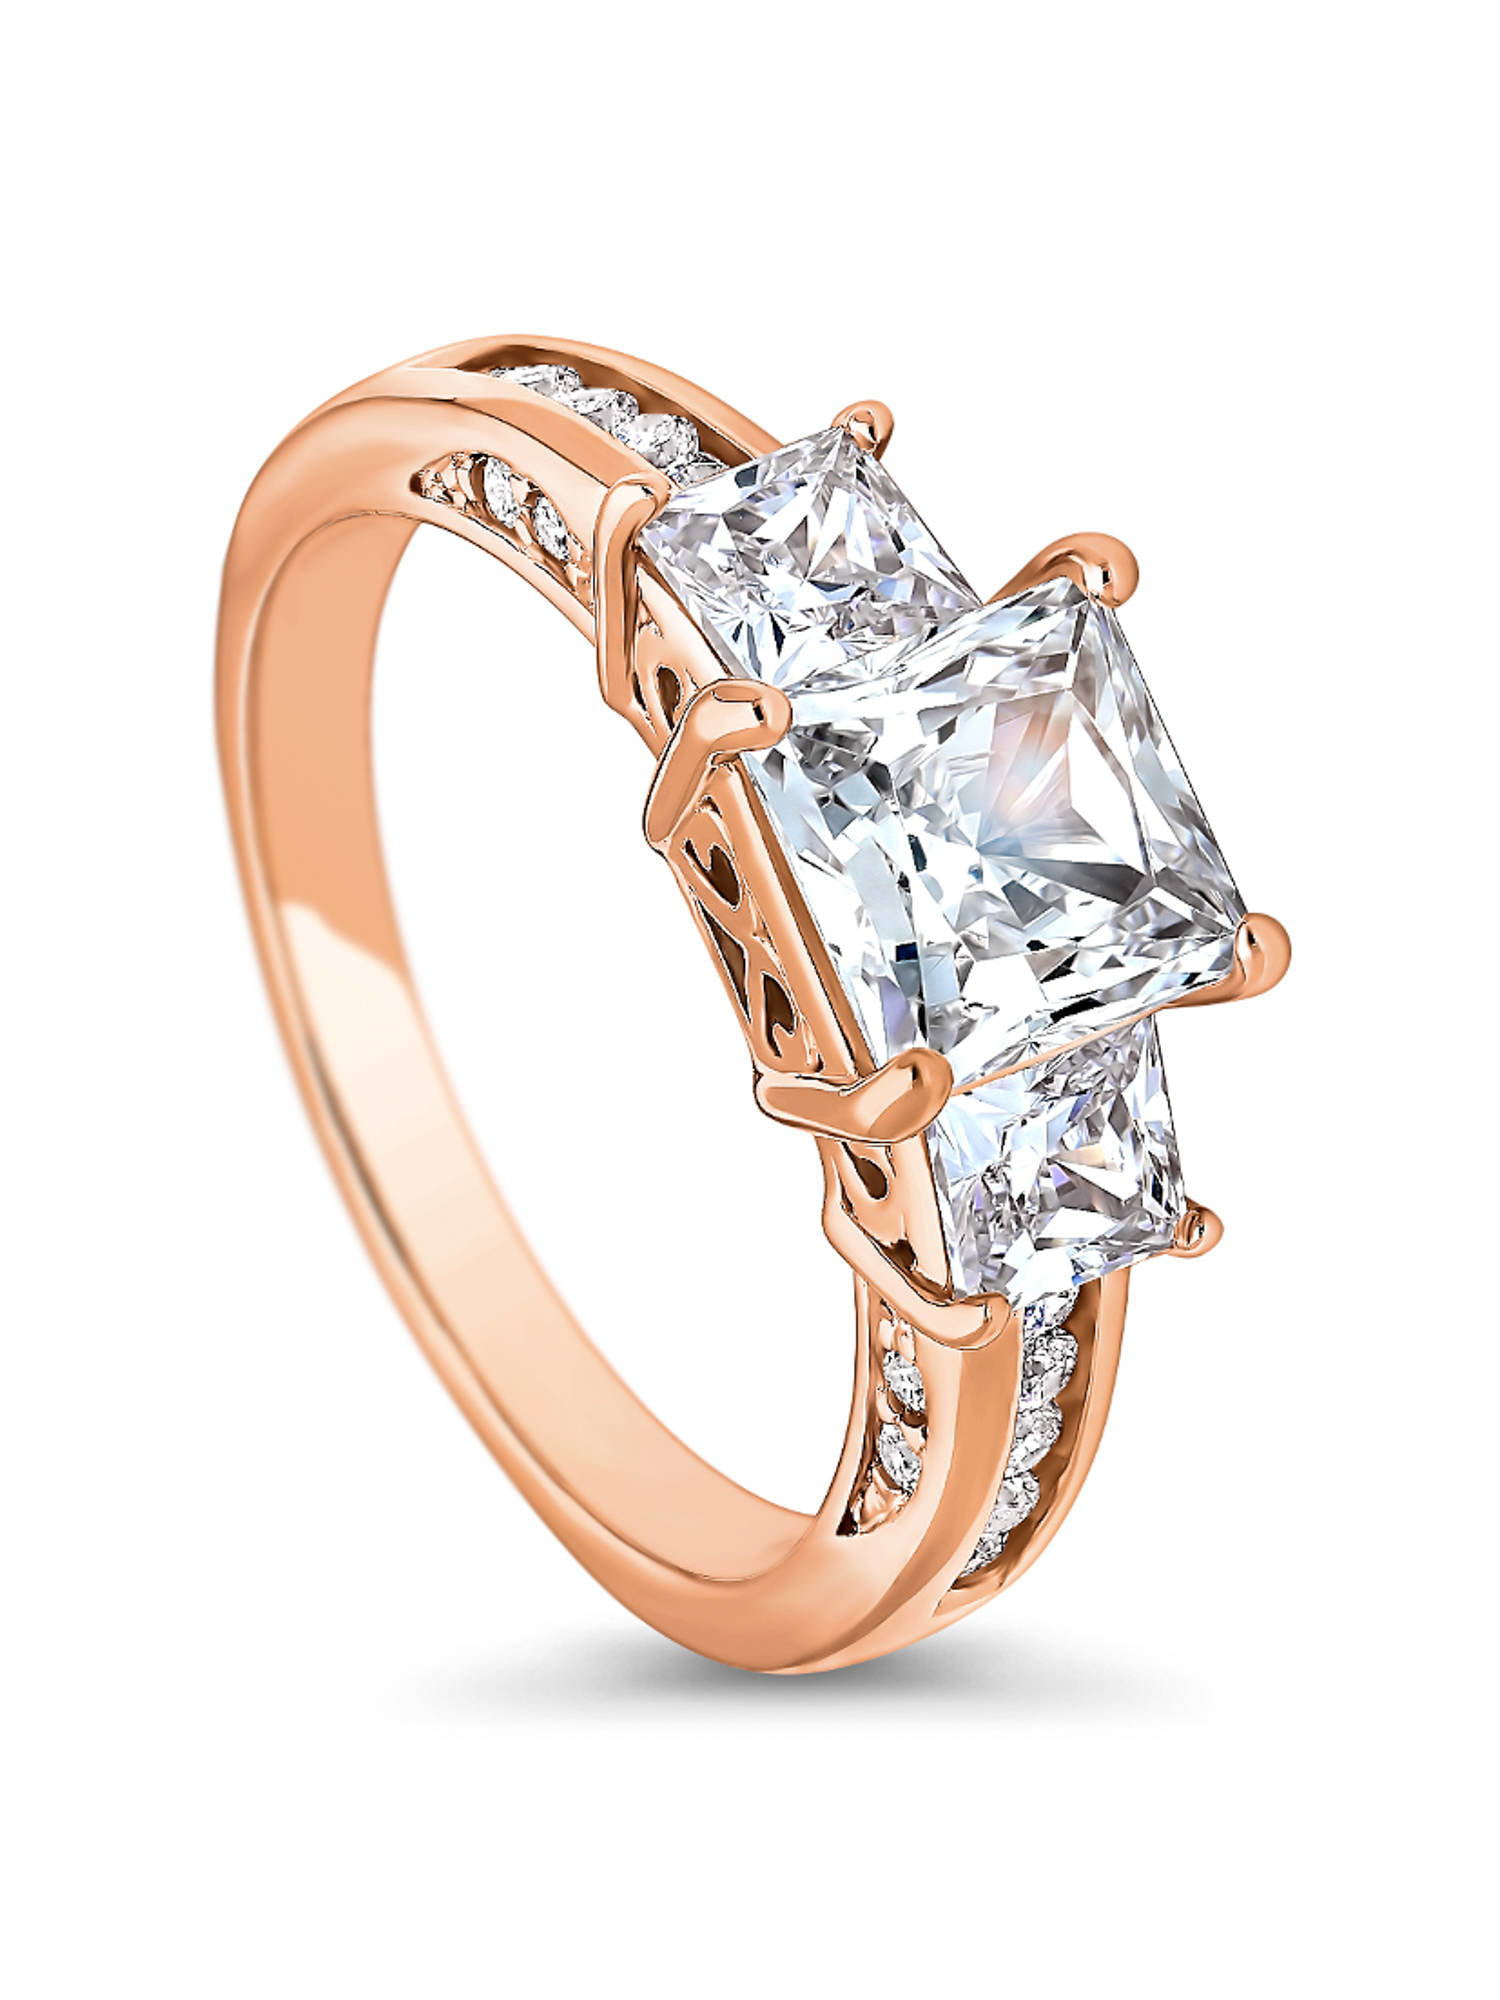 BERRICLE Rose Gold Plated Round CZ 3-Stone Anniversary Promise Engagement Ring